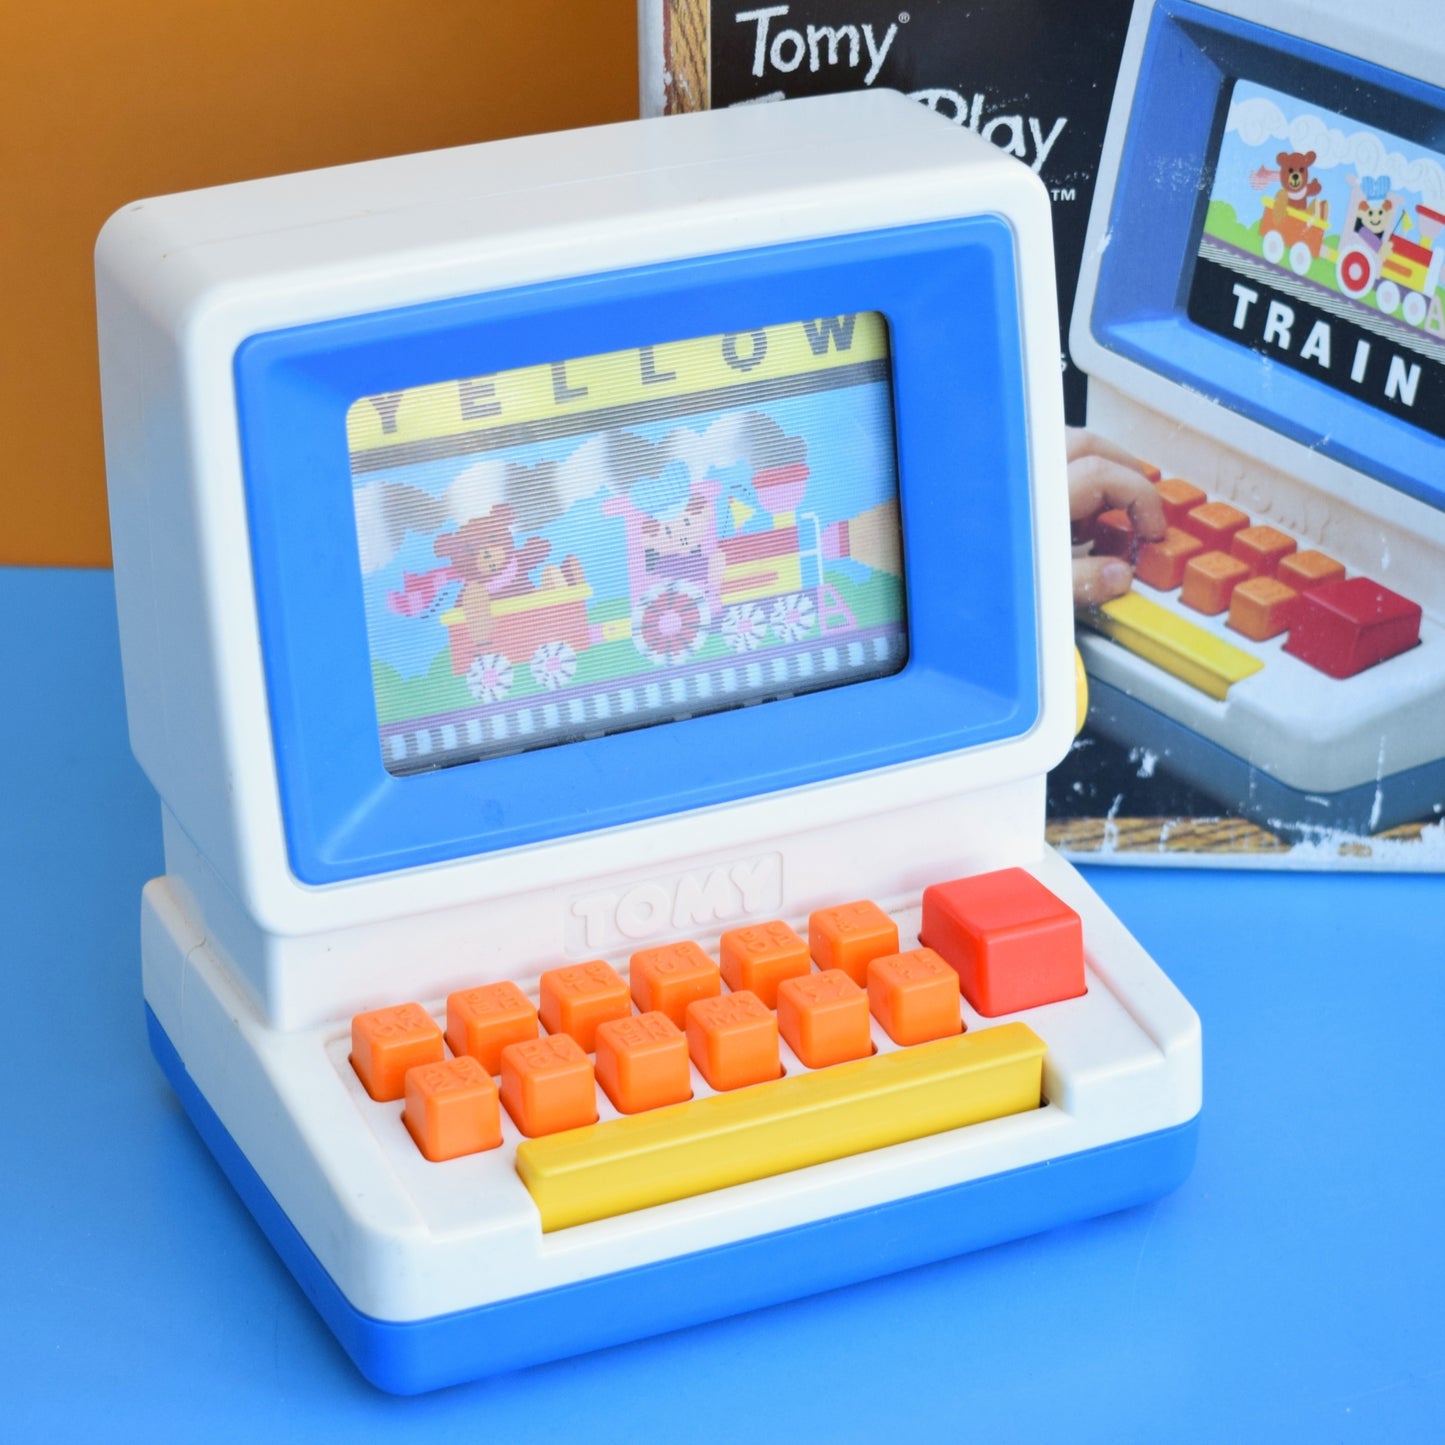 Vintage 1980s Tomy Tutor Play Computer - Boxed